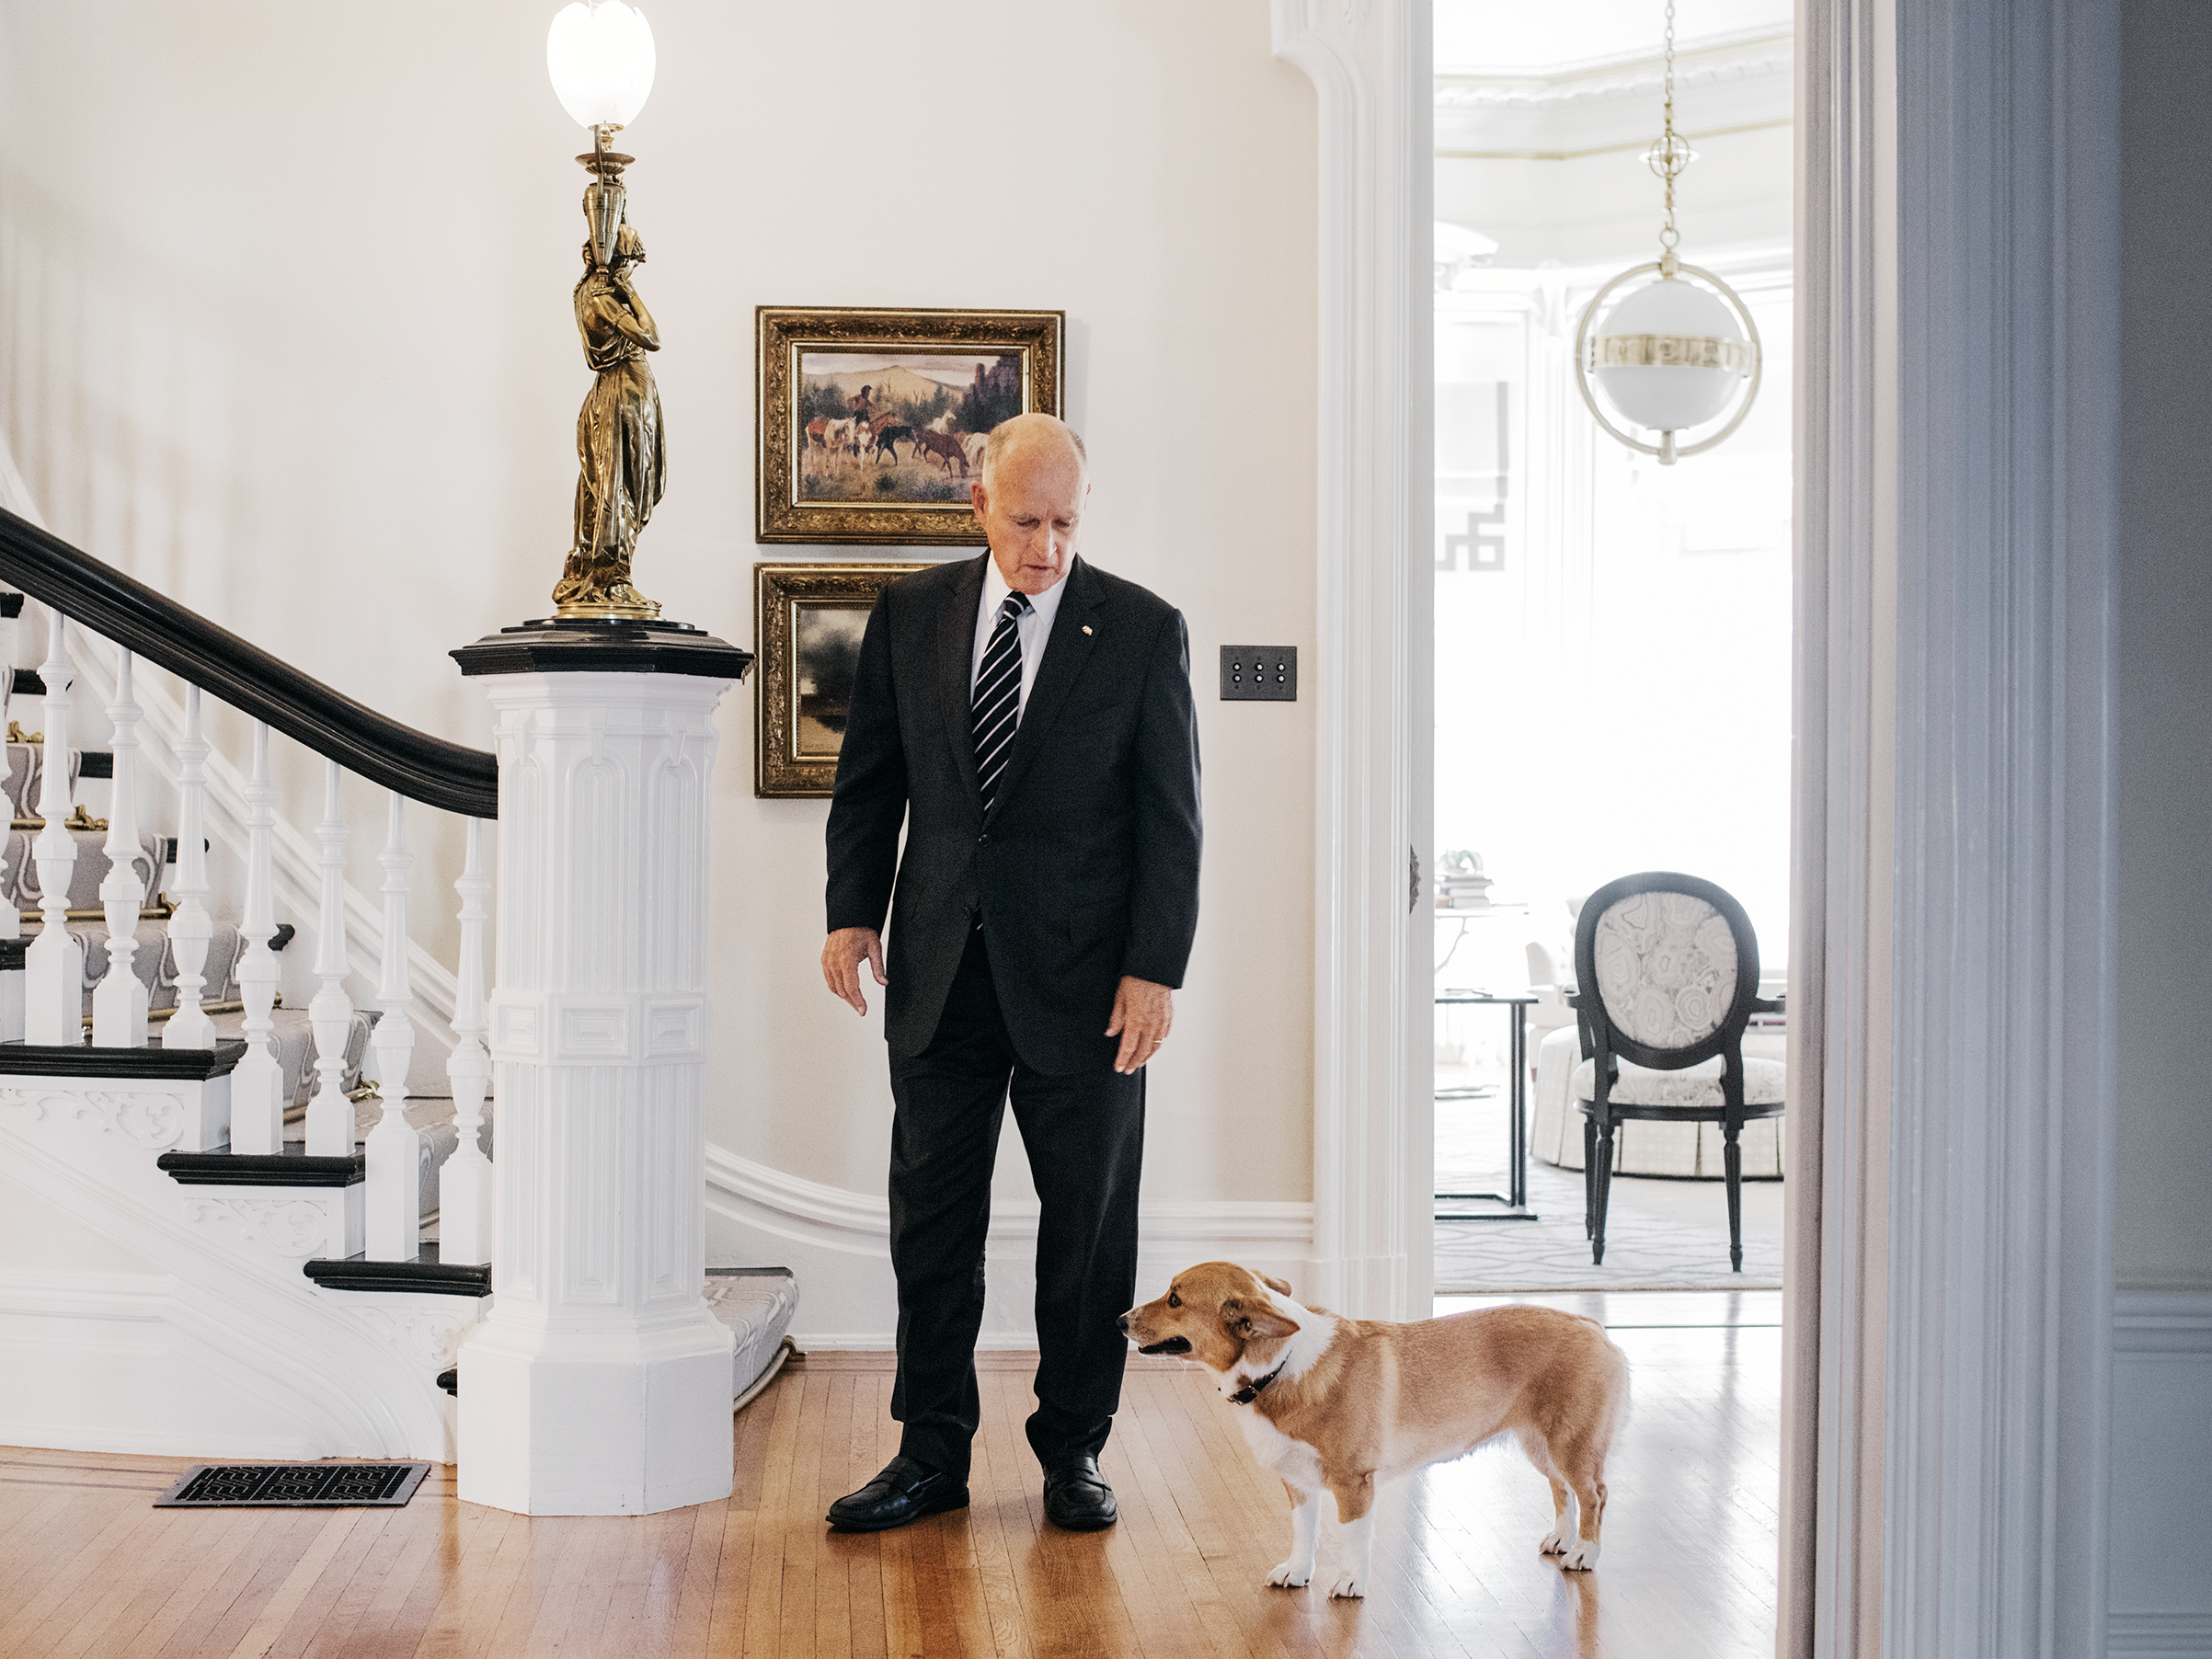 California Governor Jerry Brown, nearing the end of an unprecedented fourth term in office, stands in the governor’s mansion in Sacramento (Benjamin Rasmussen for TIME)